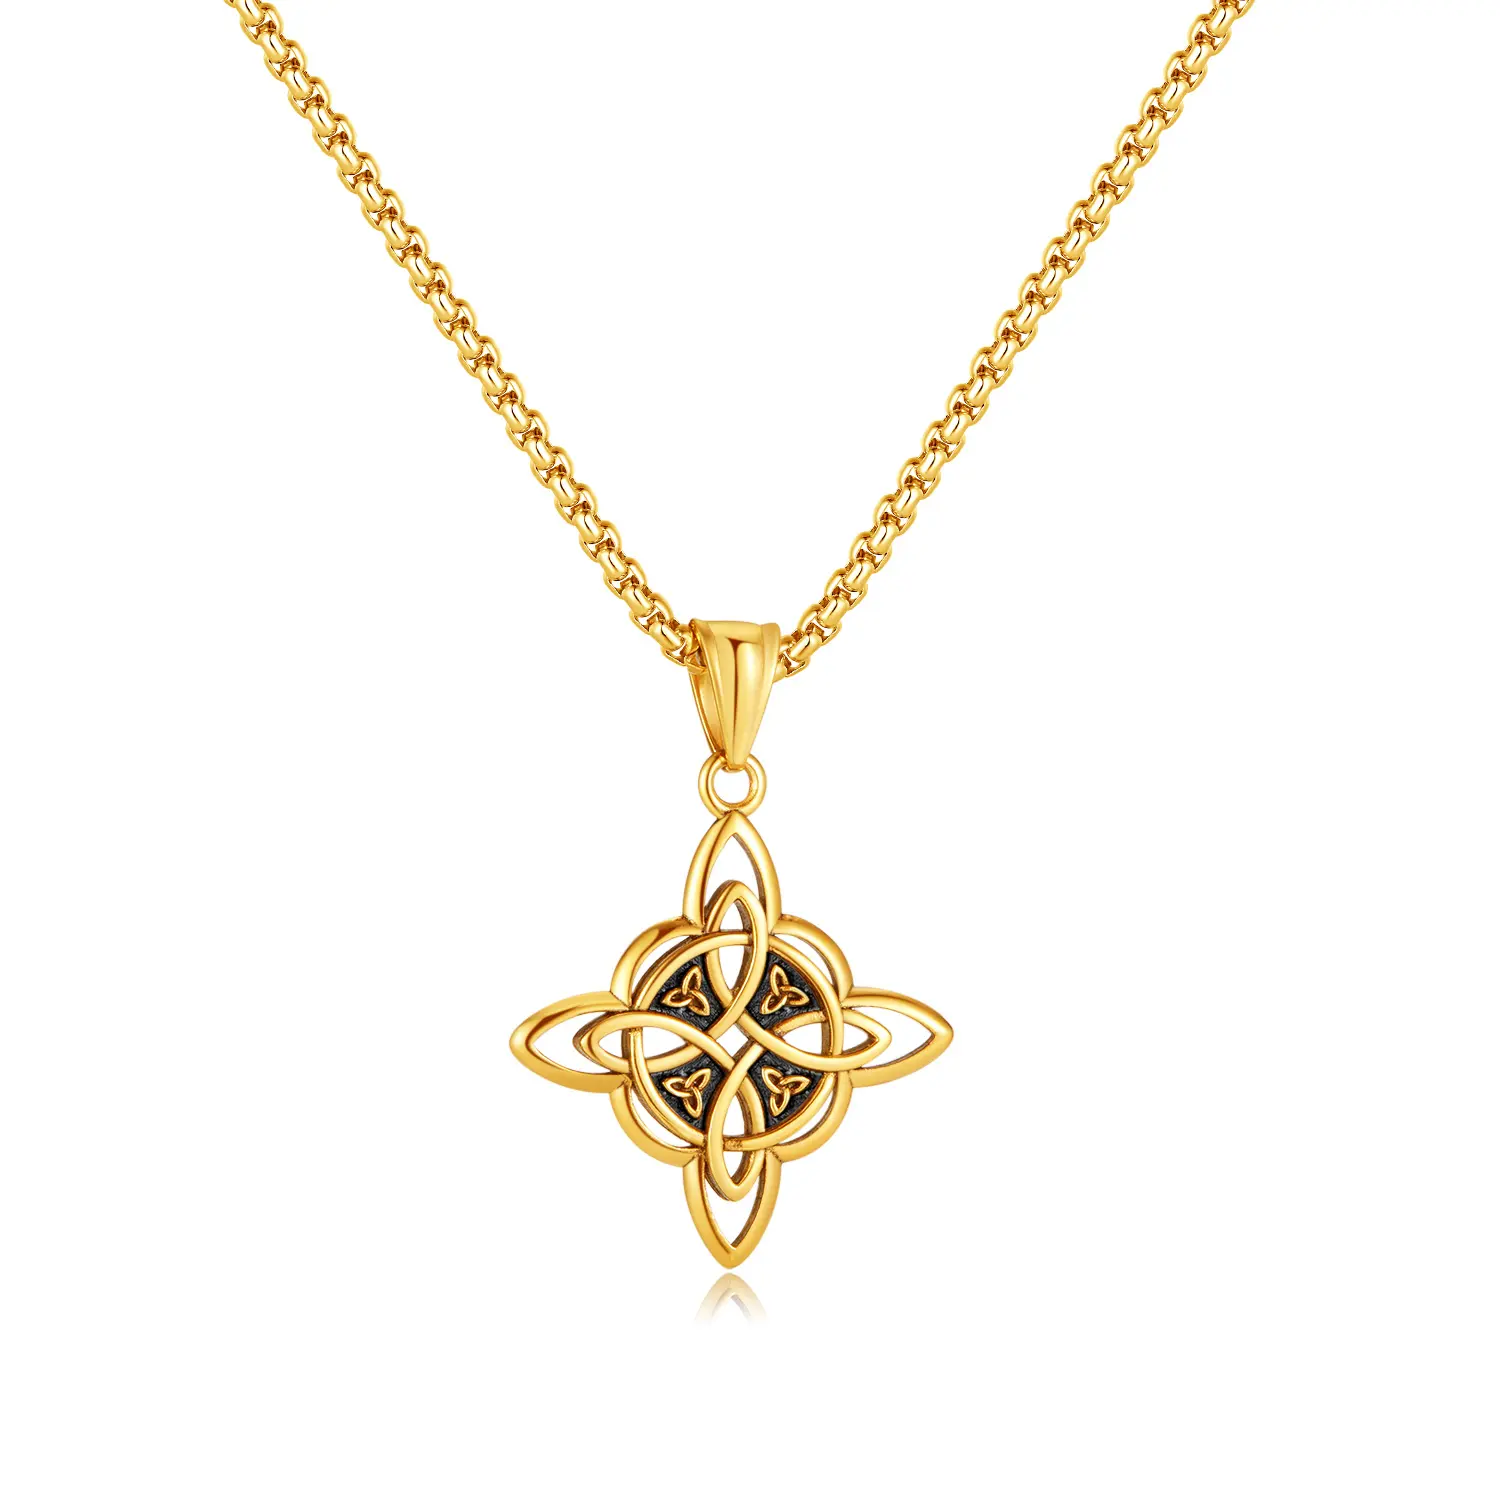 Wholesale Men's Fashion Jewellery Gift Accessories Custom Vintage 18k Gold Plated Stainless Steel Celtic Knot Pendant Necklaces